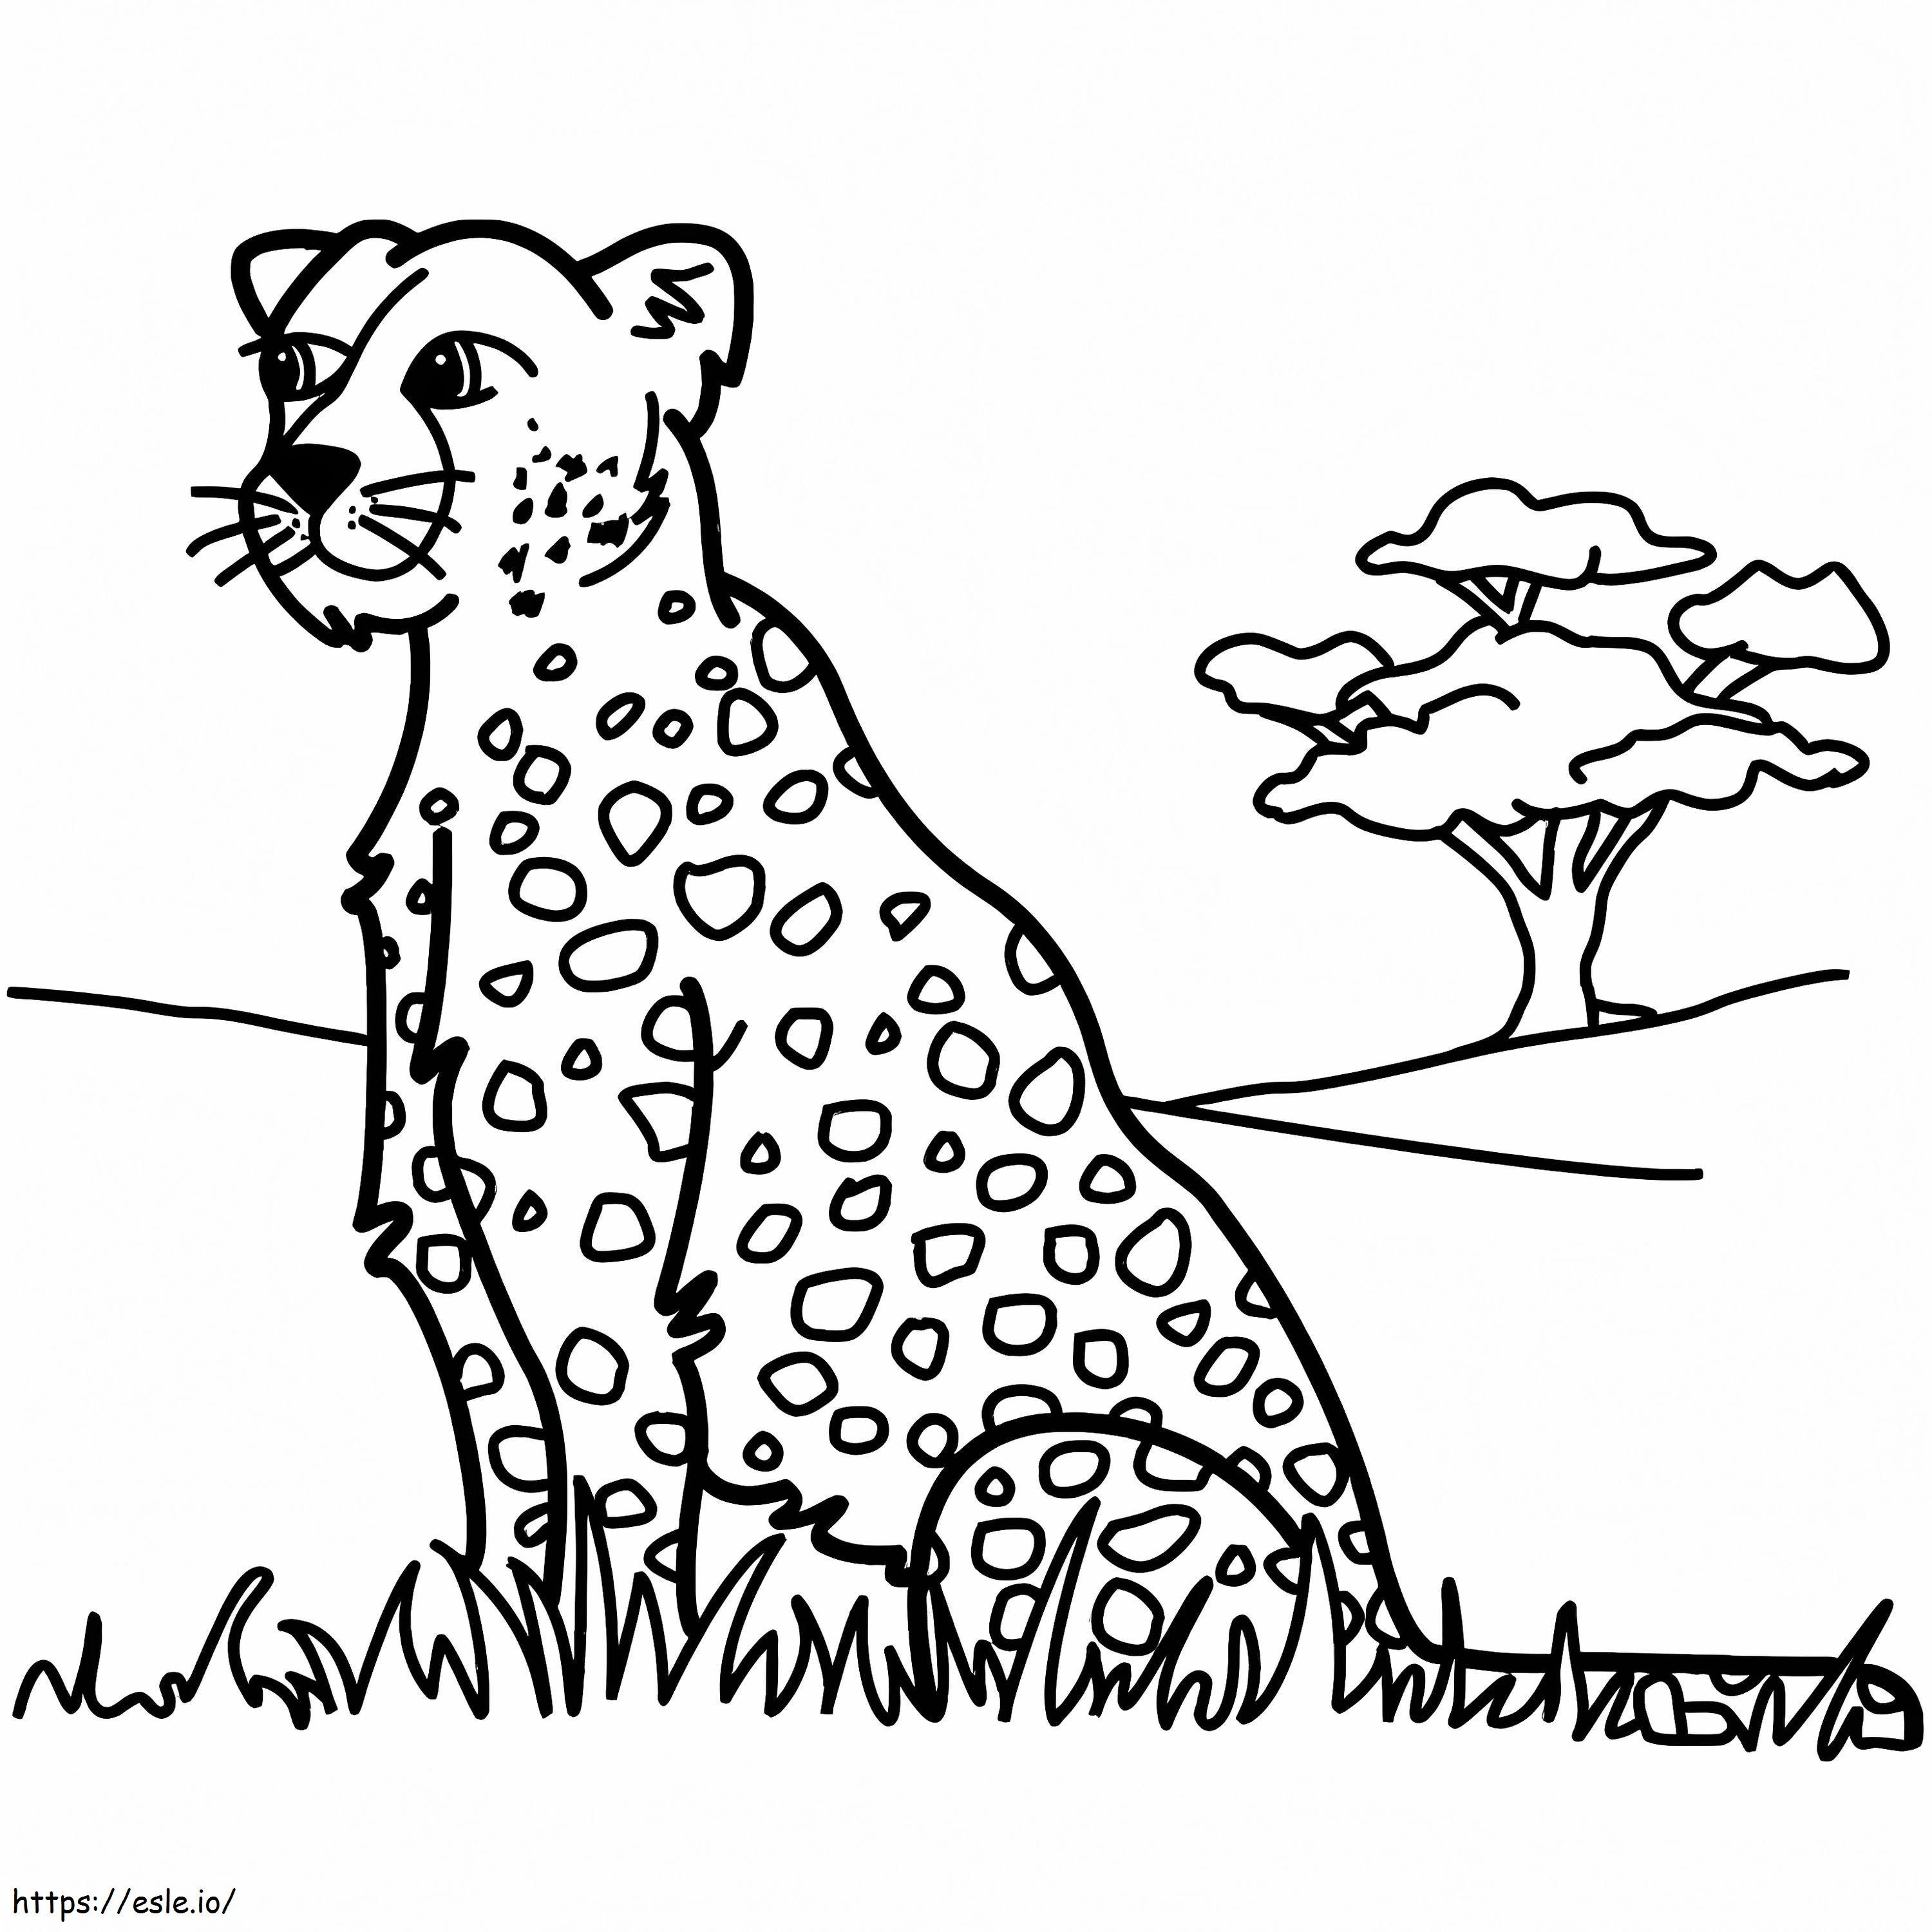 Leopard Assis coloring page